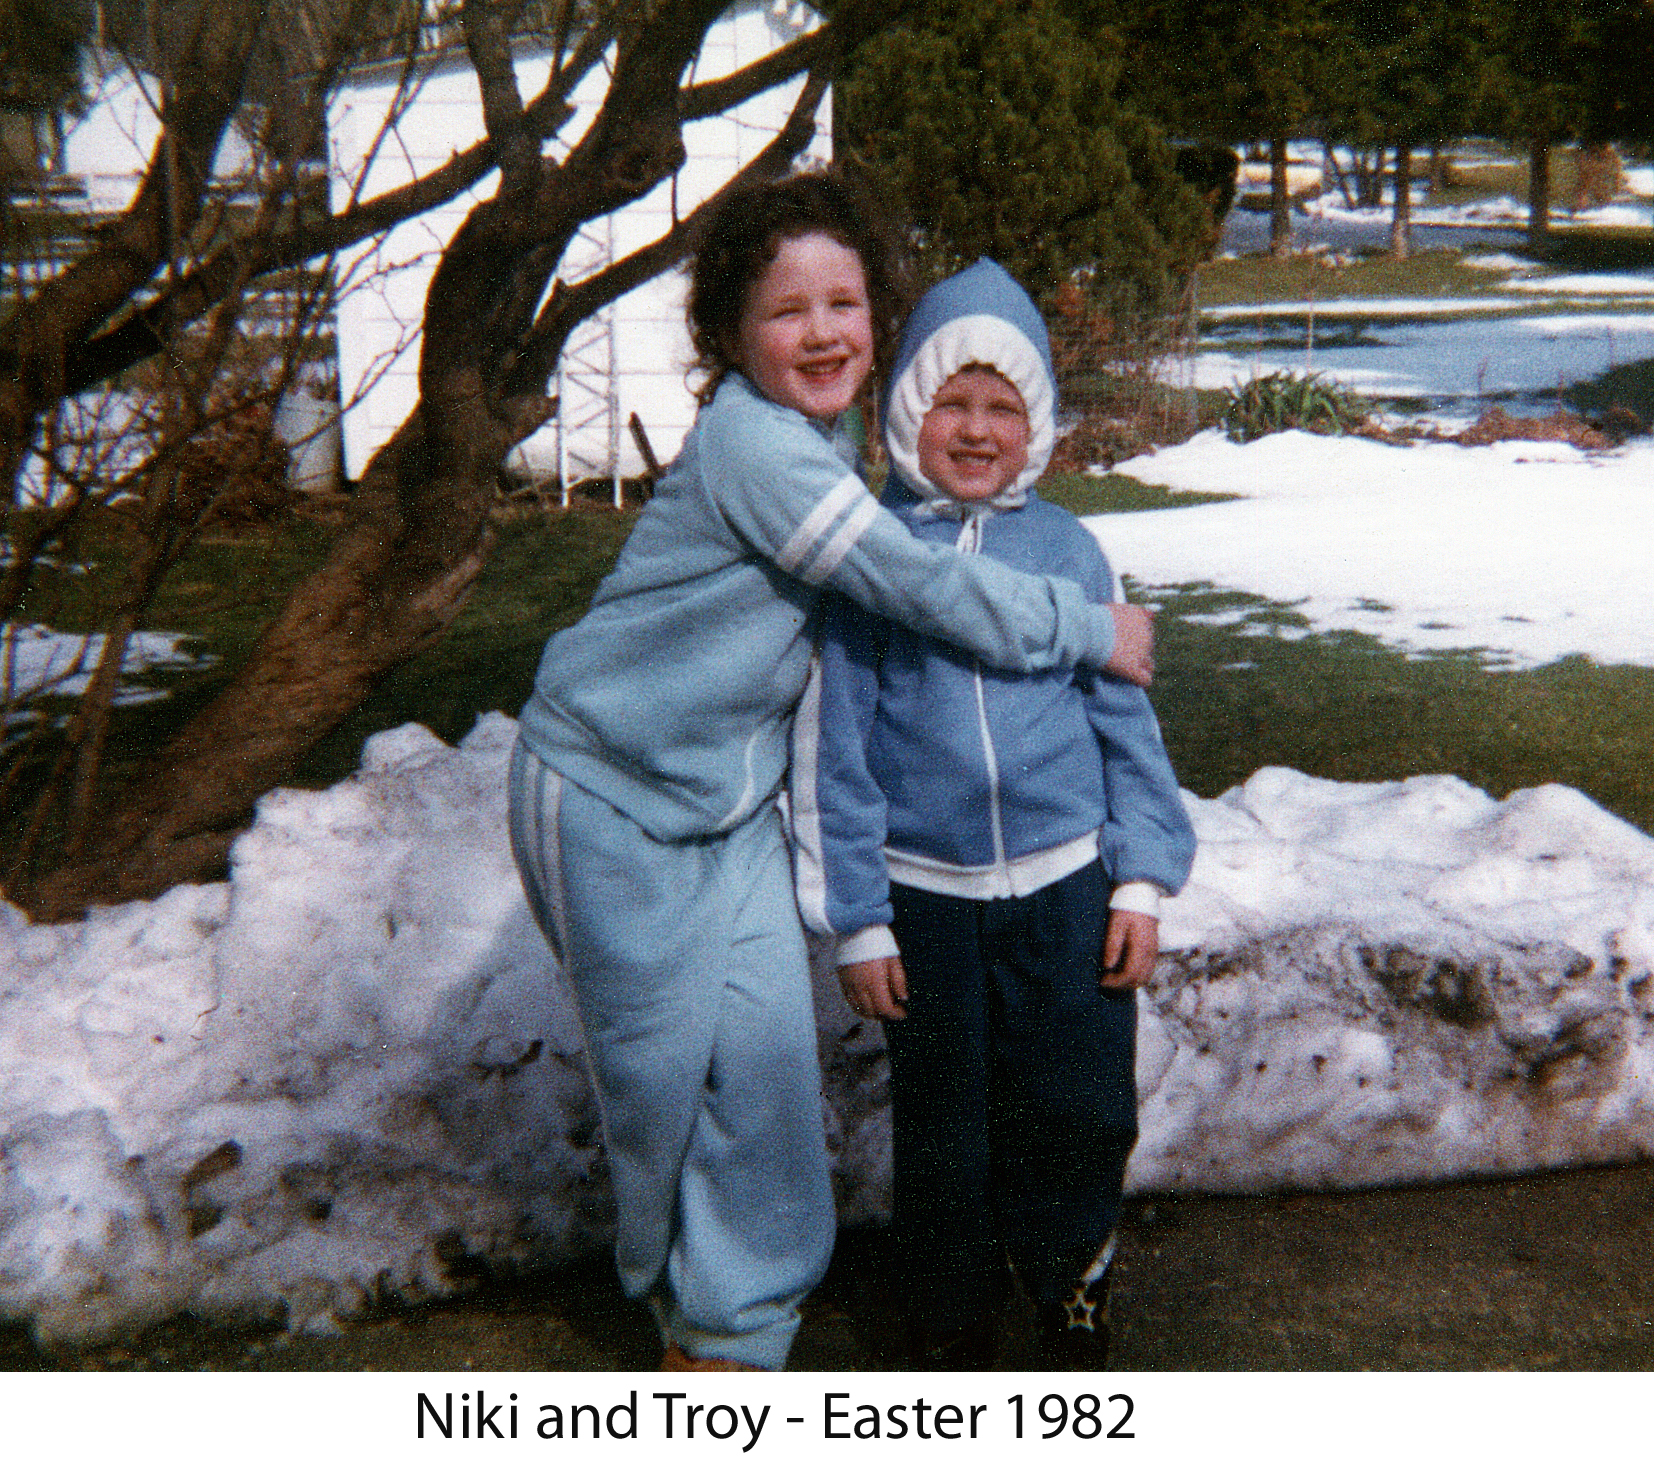 Niki holding Troy standing in their snowsuits in front of a snowbank.